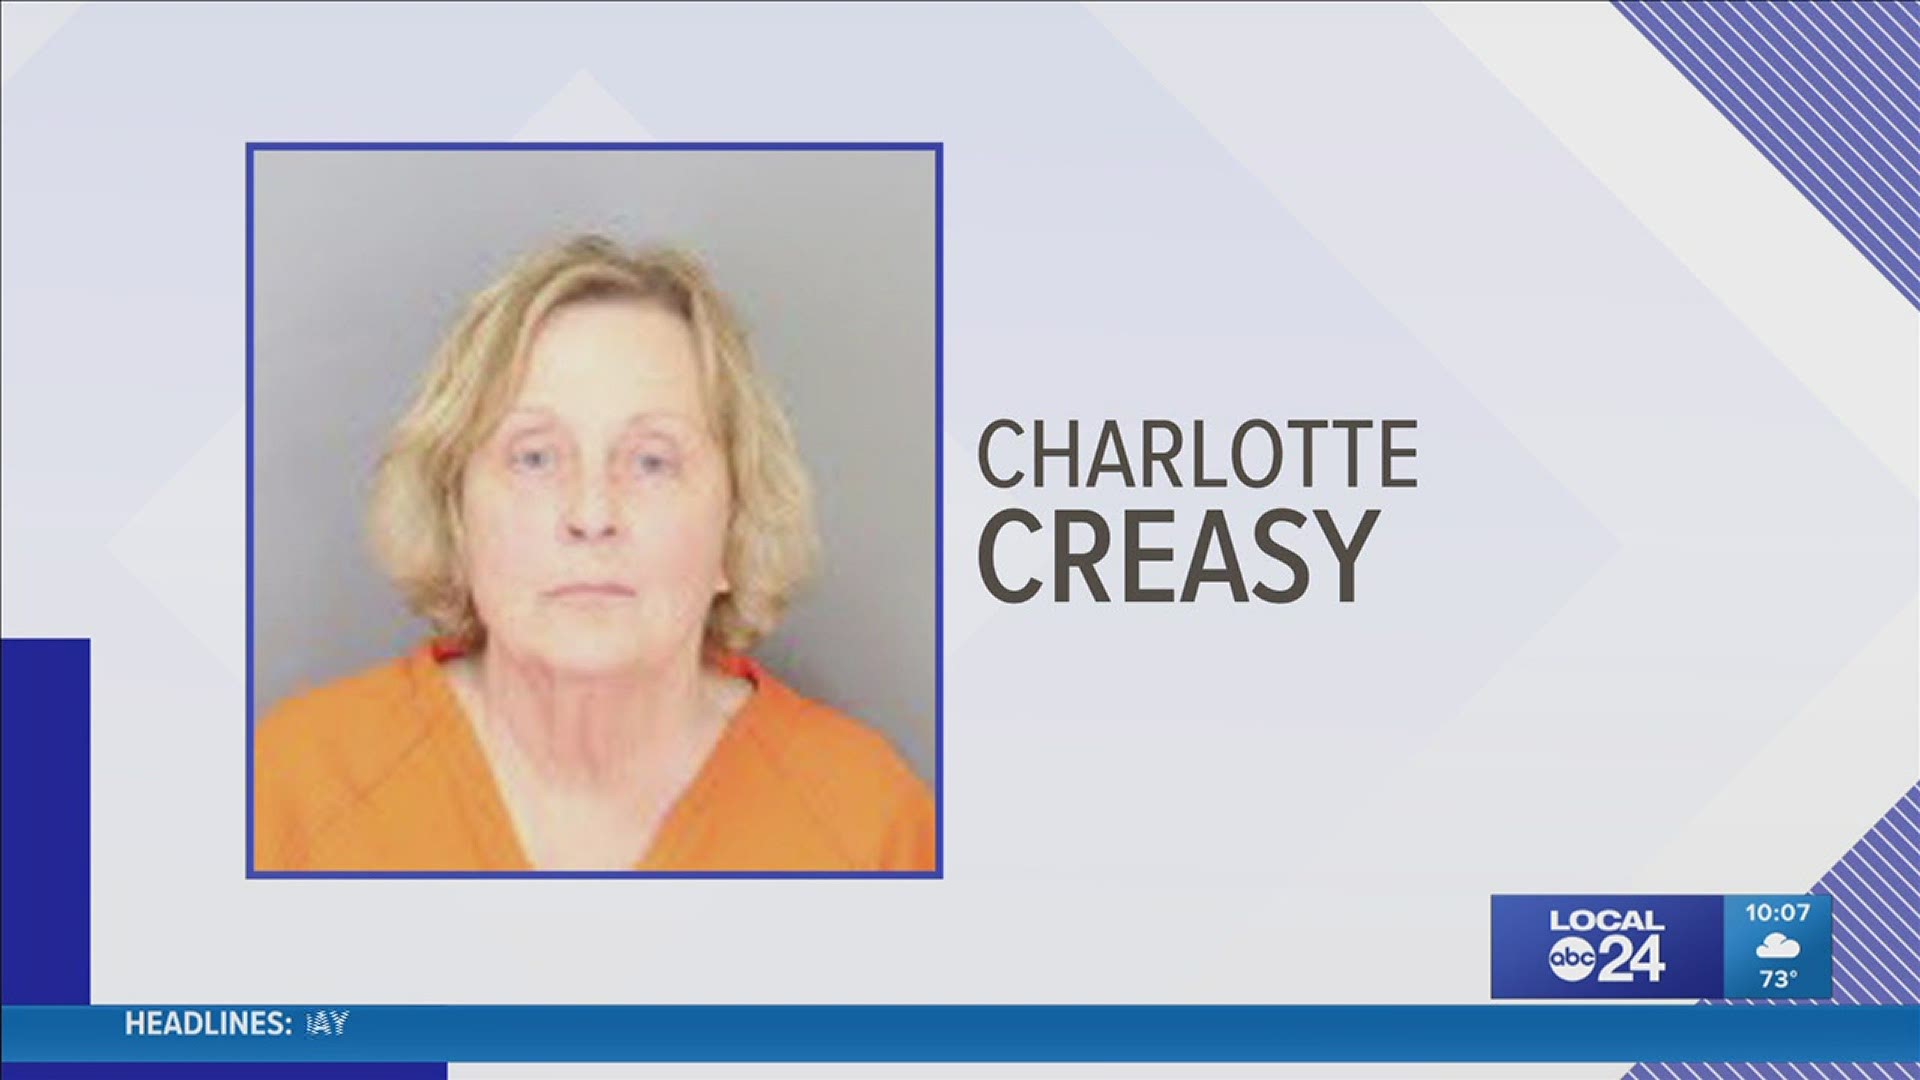 A grand jury this week indicted 74-year-old Charlotte Creasy on eight counts of aggravated cruelty to animals and 24 counts of cruelty to animals.